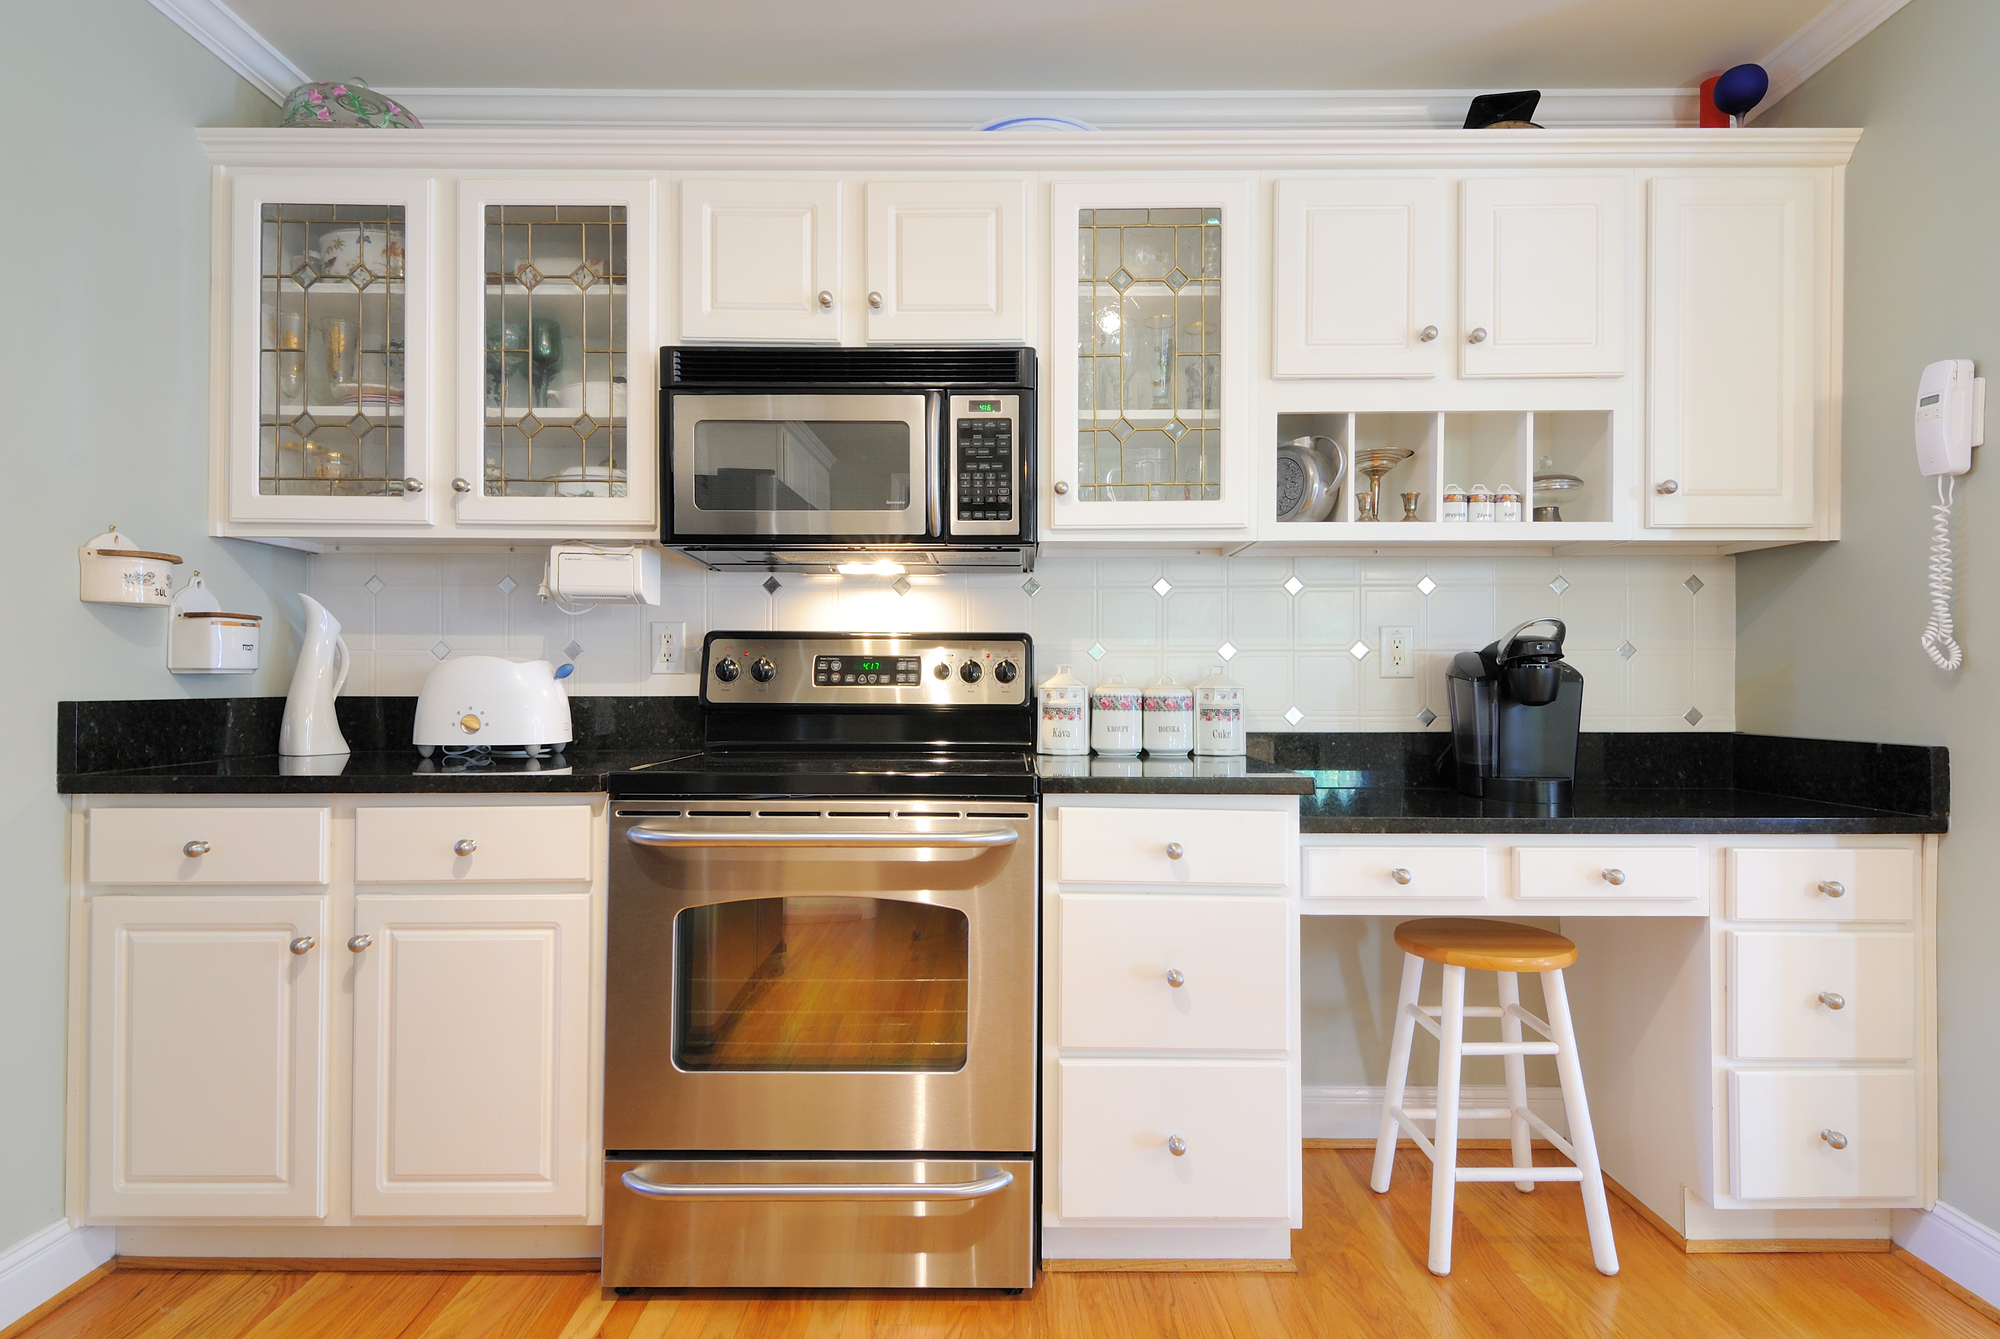 4 Small Kitchen Remodeling Design Ideas To Consider Lind Construction Llc Lincoln Nearsay